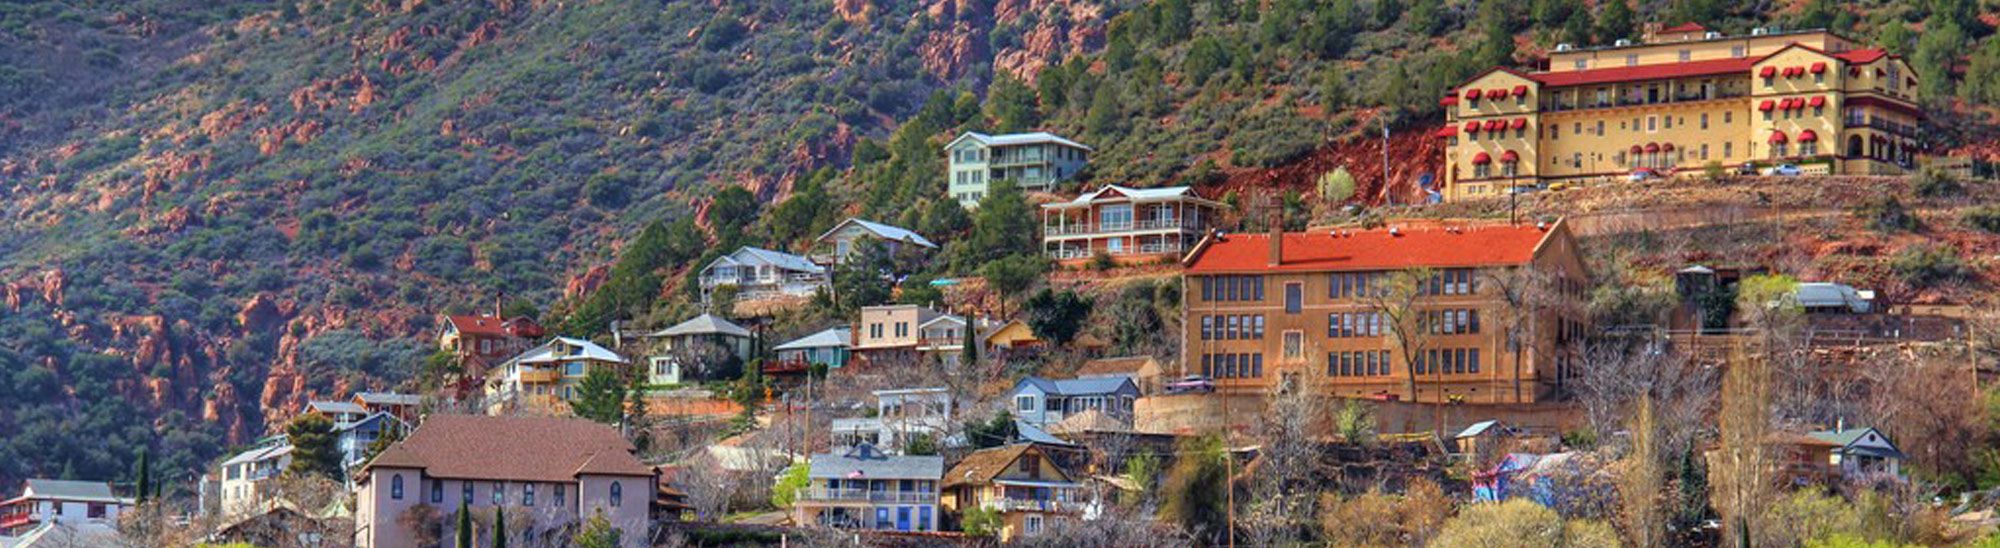 Jerome AZ Activities and Attractions